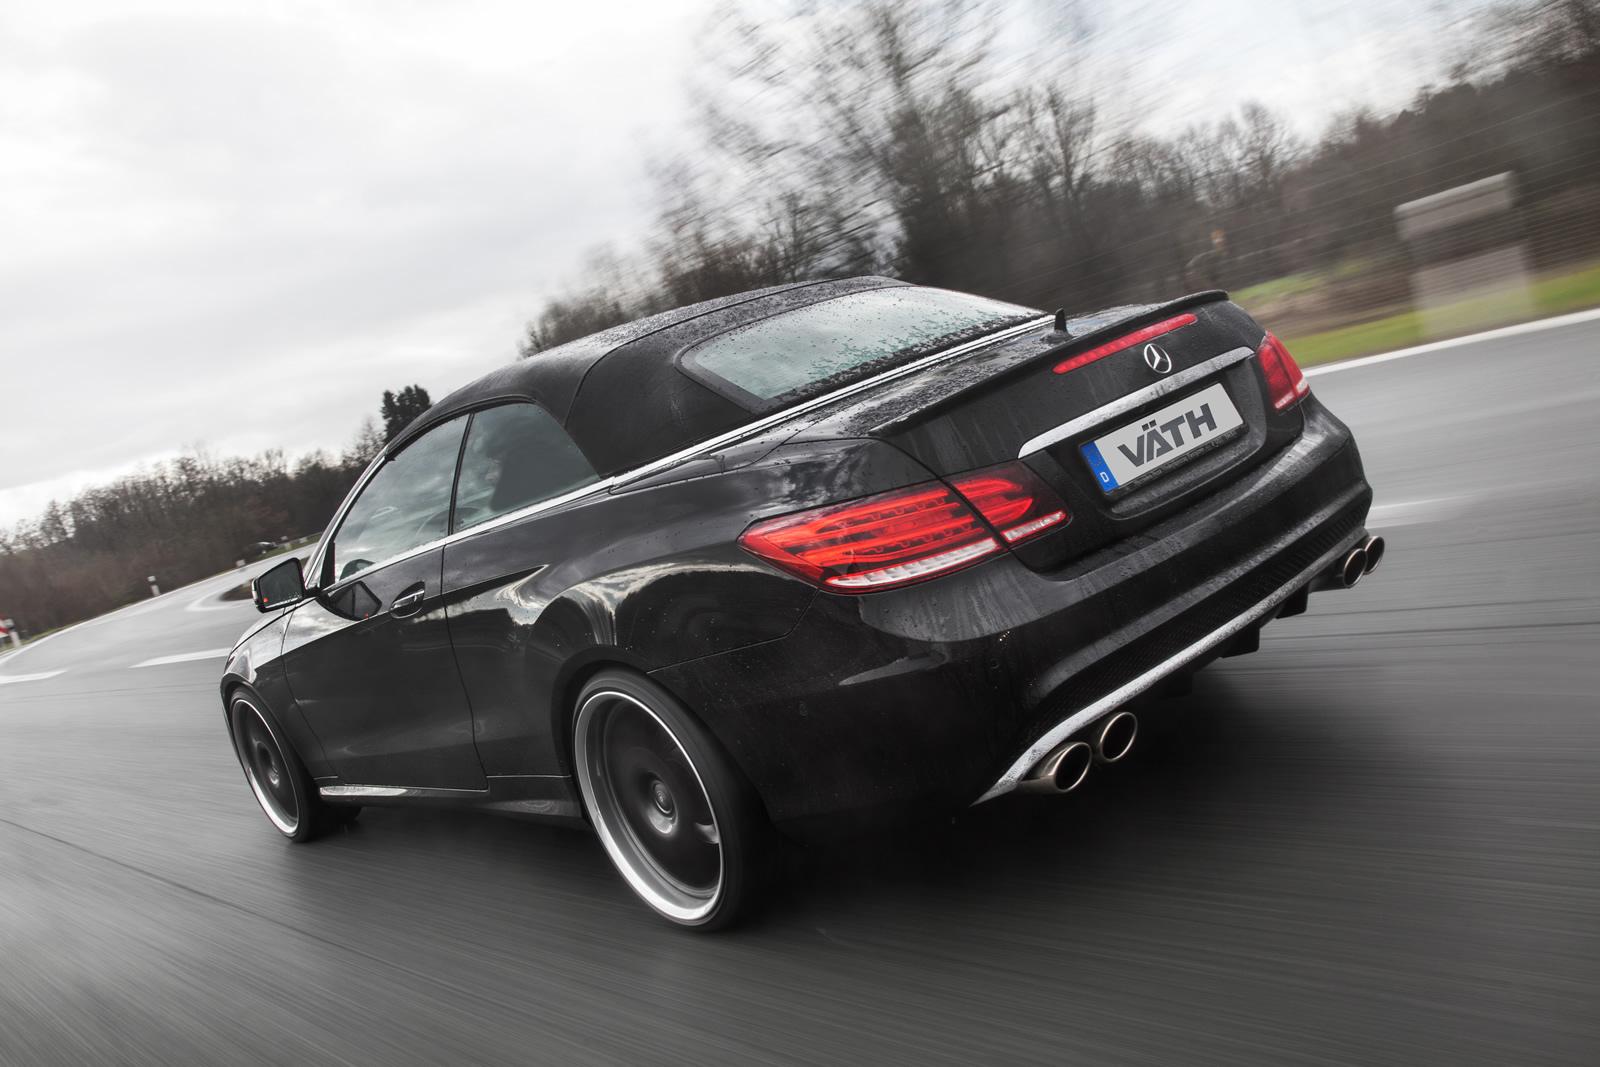 Mercedes-Benz E500 Cabriolet Receives 550 HP from VATH, Sounds Like ...